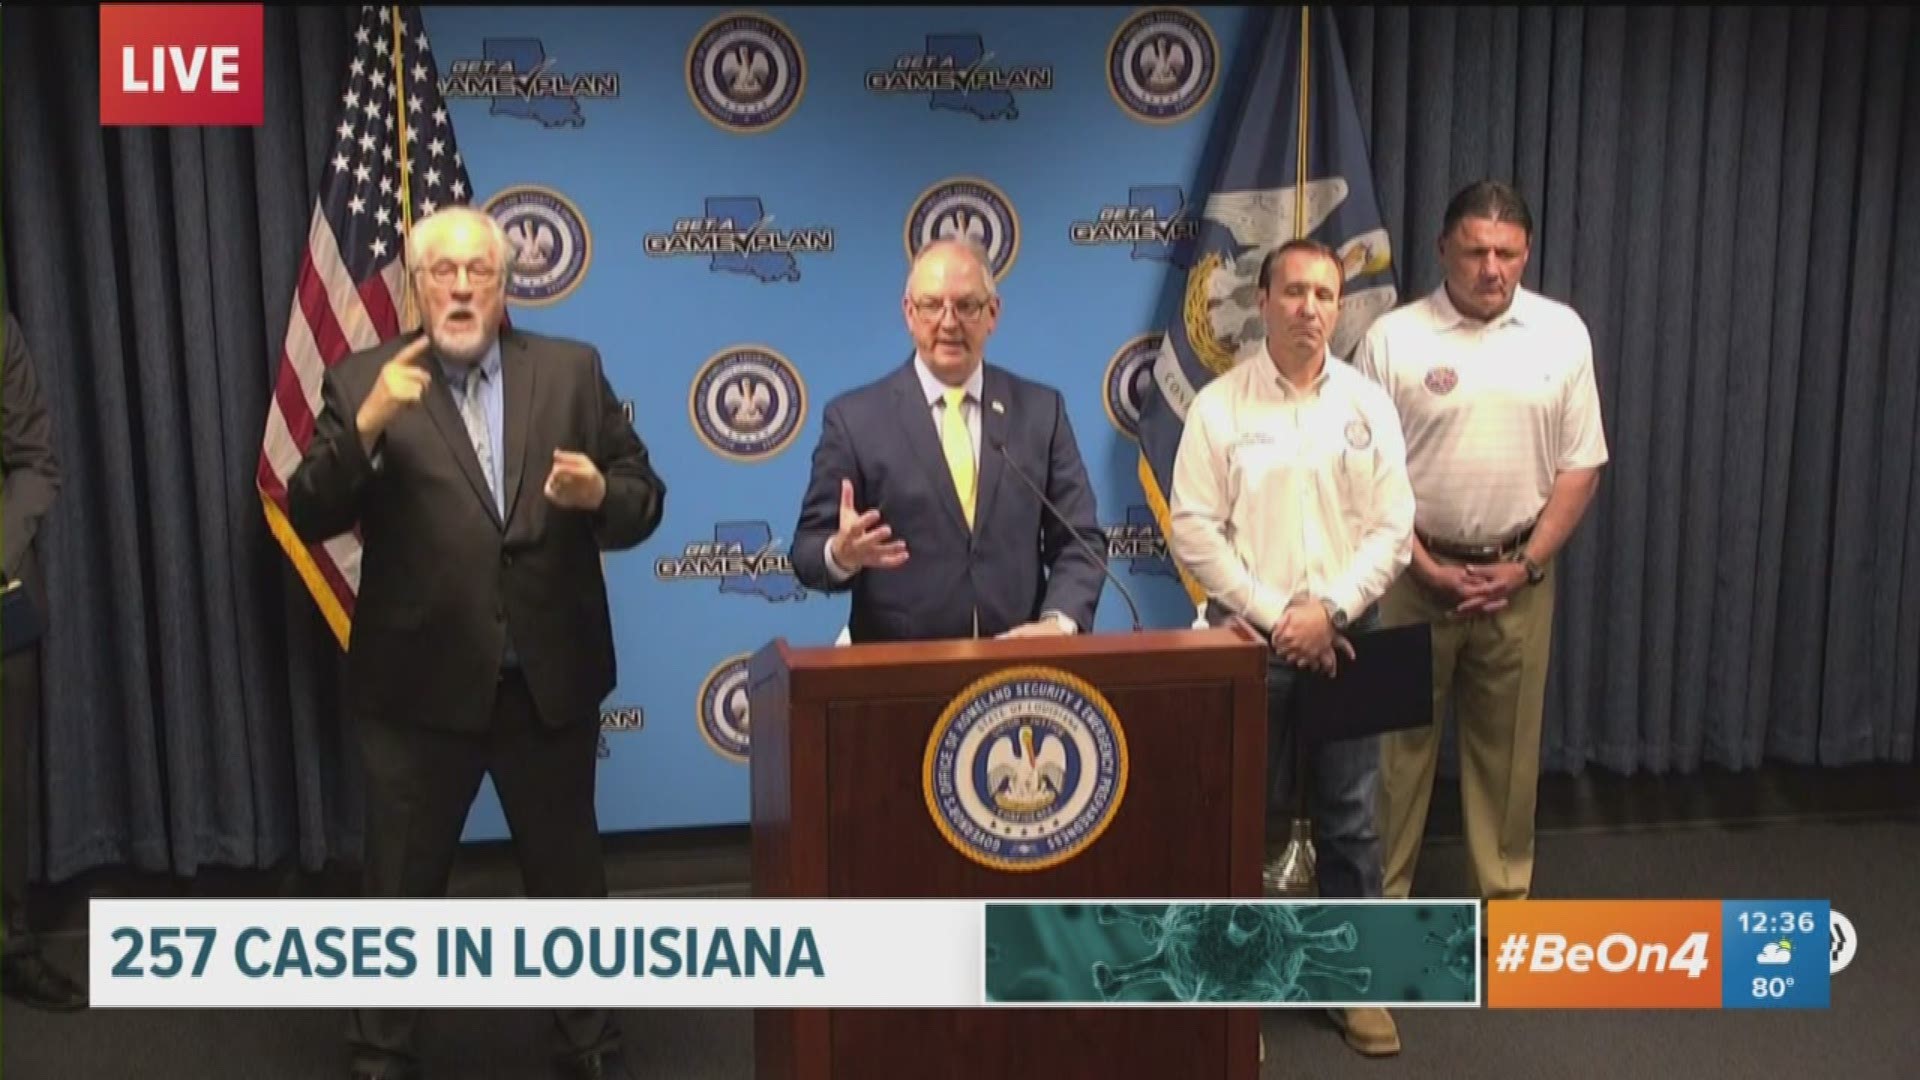 Louisiana Governor John Bel Edwards says the number of cases will likely jump dramatically in the next 24-36 hours as thousands of test results come in.